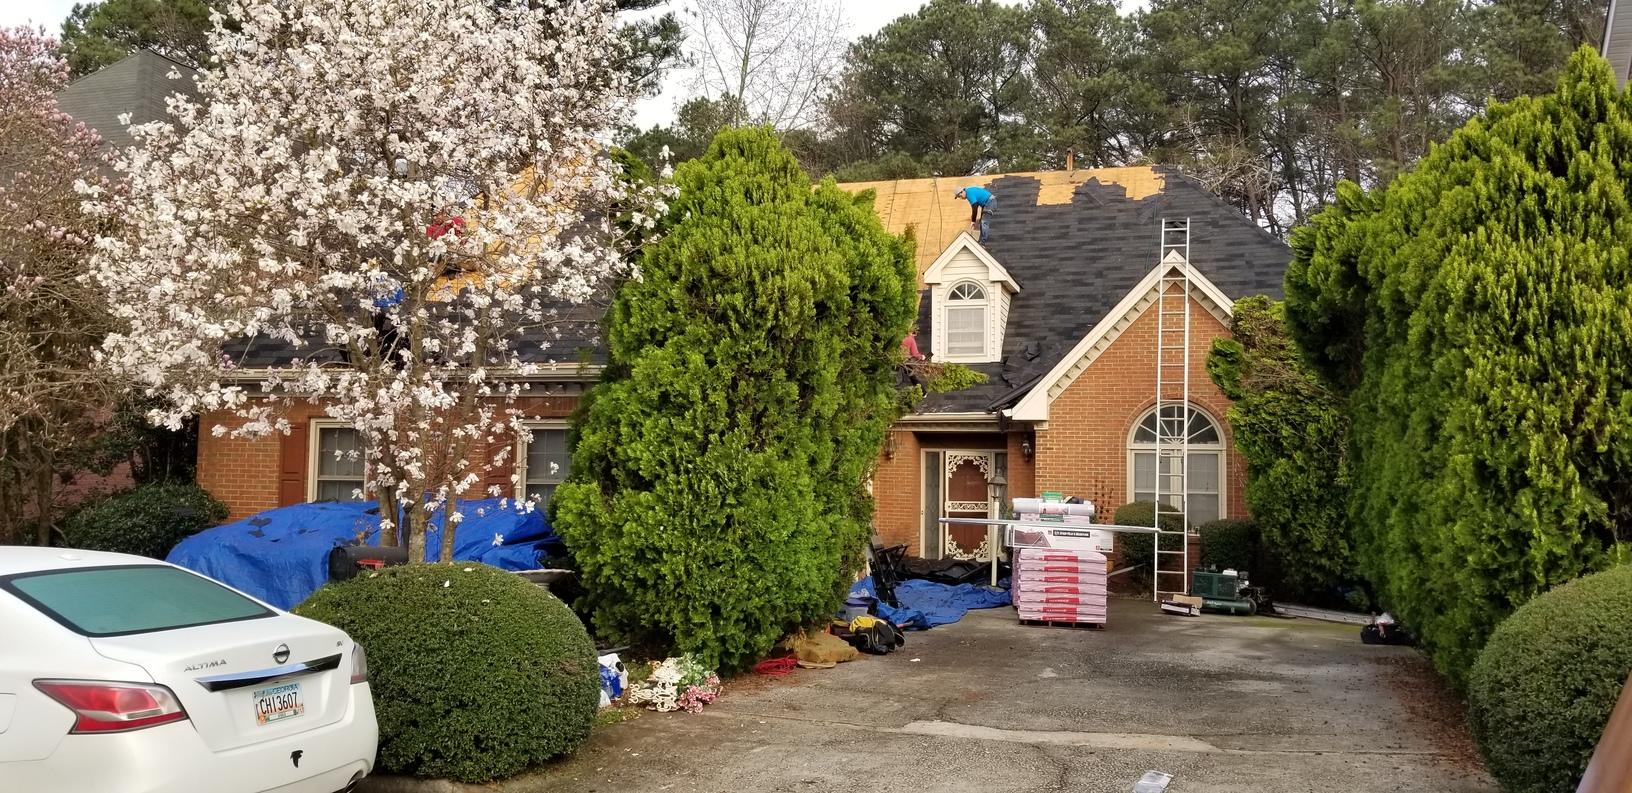 Griffin Roofing in Atlanta, GA - Roof replacement